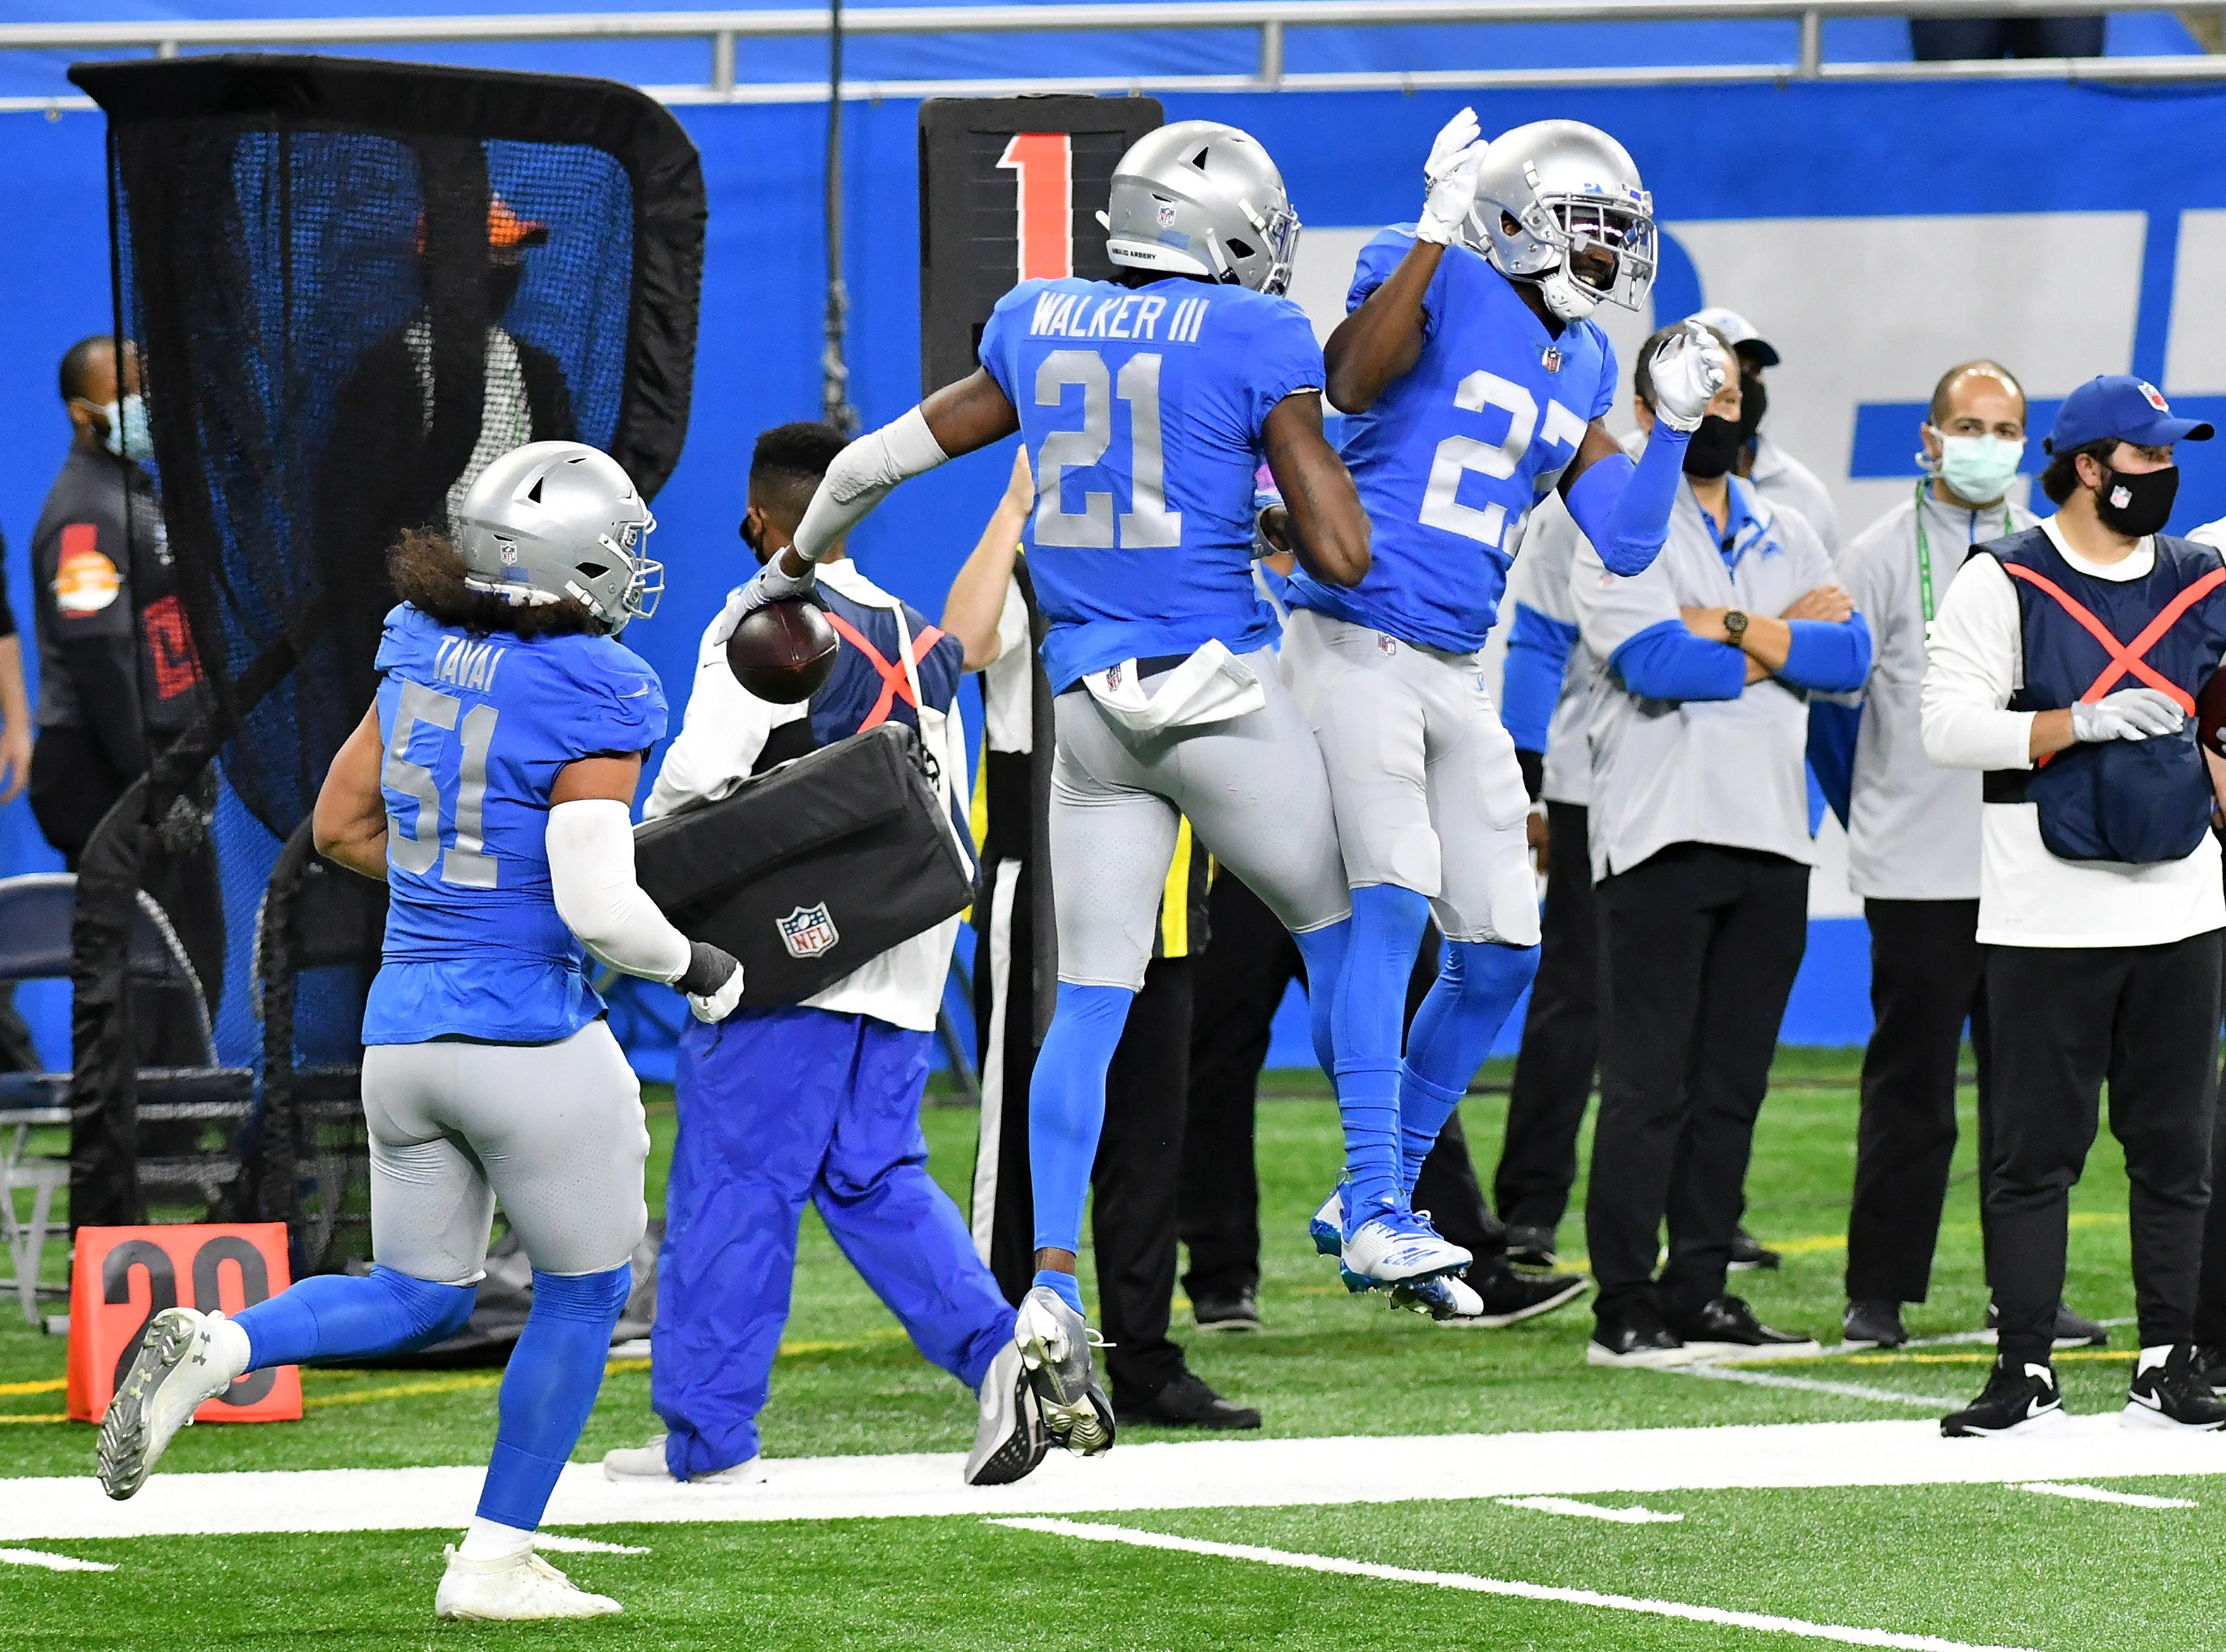 Lions defensive back Tracy Walker (21) and Lions cornerback Justin Coleman (27) celebrate after Lions recover a fumble in the first half.